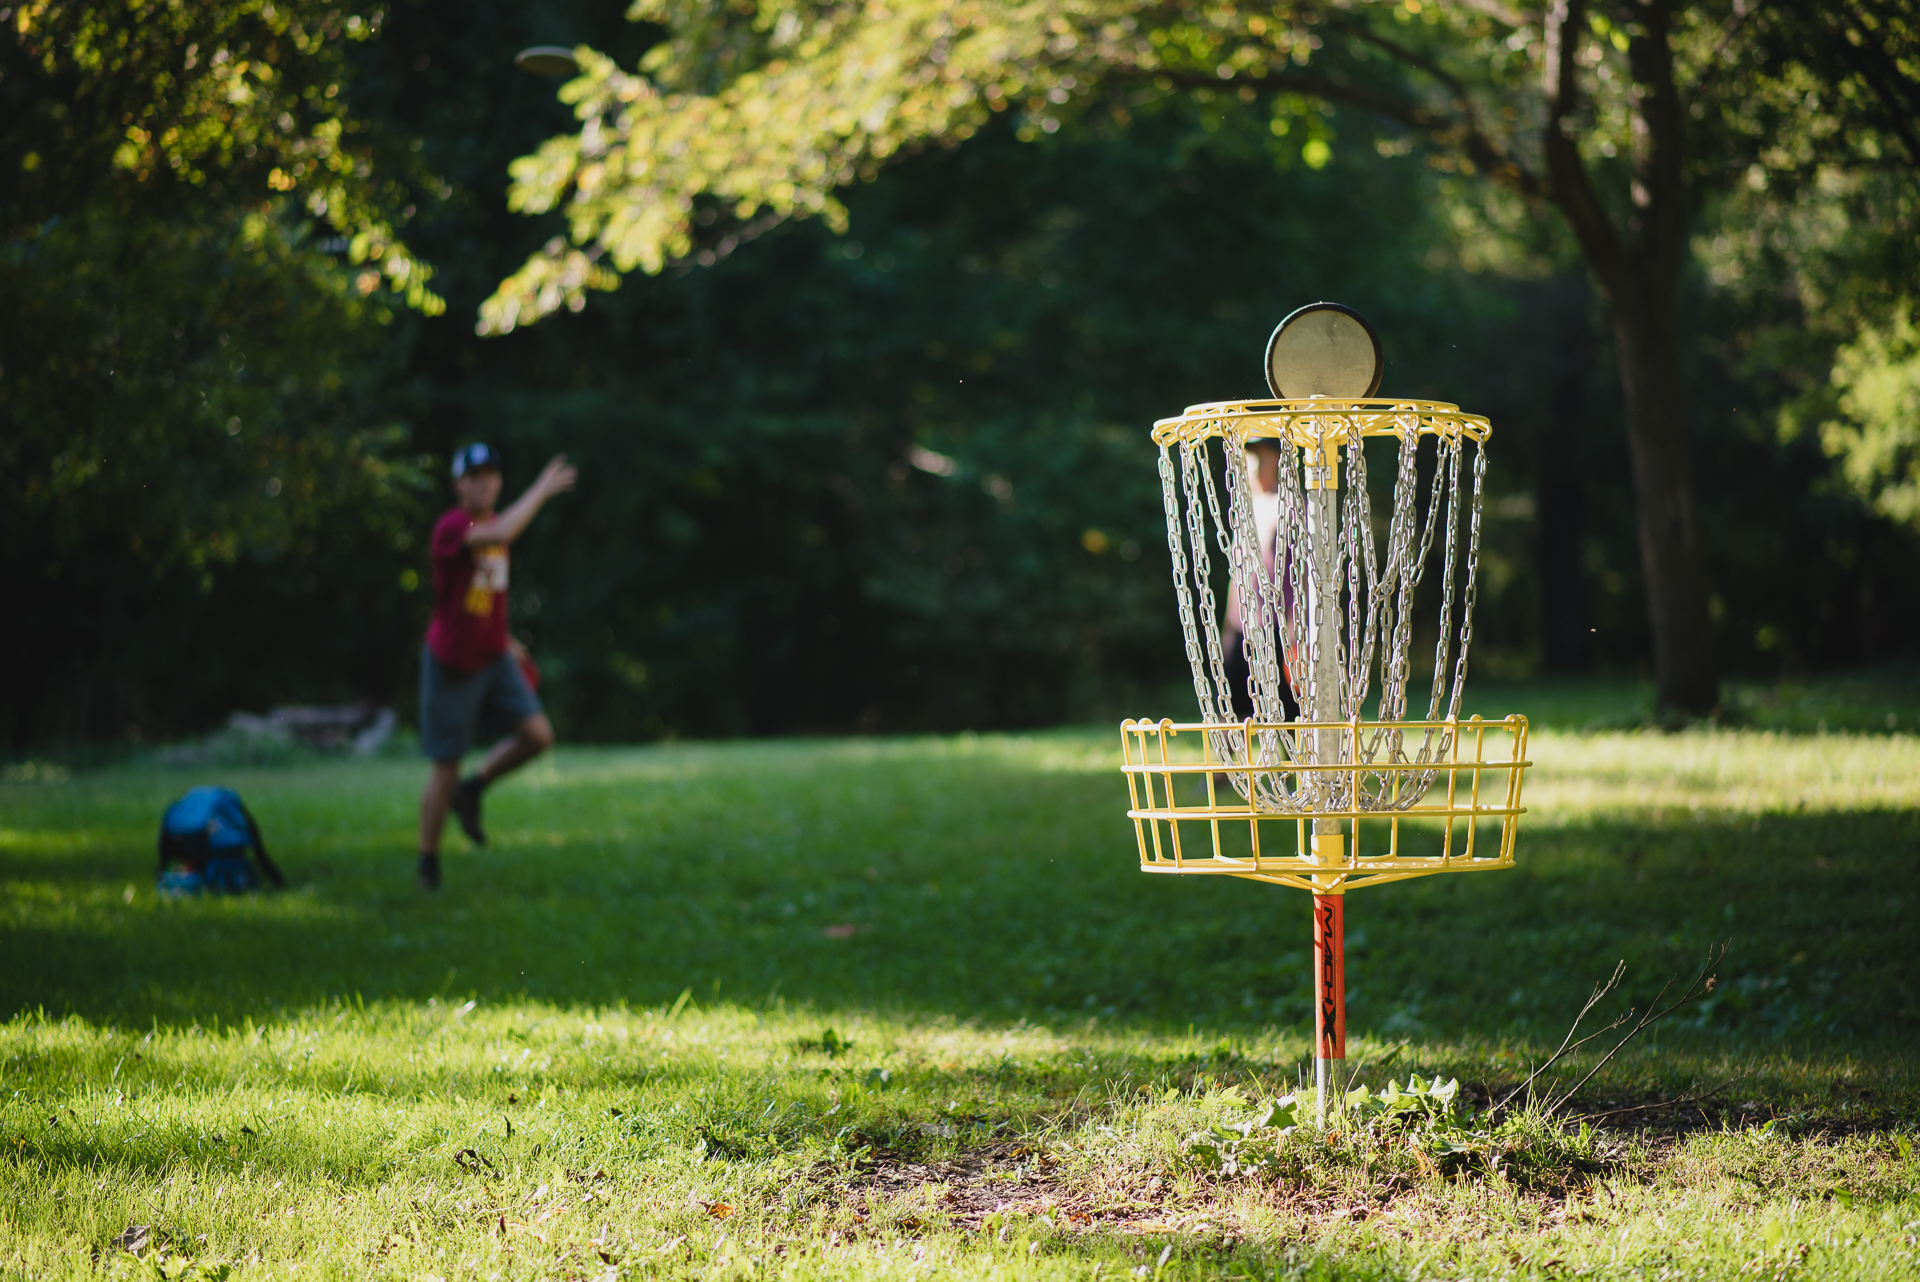 an image of a person playing disc golf